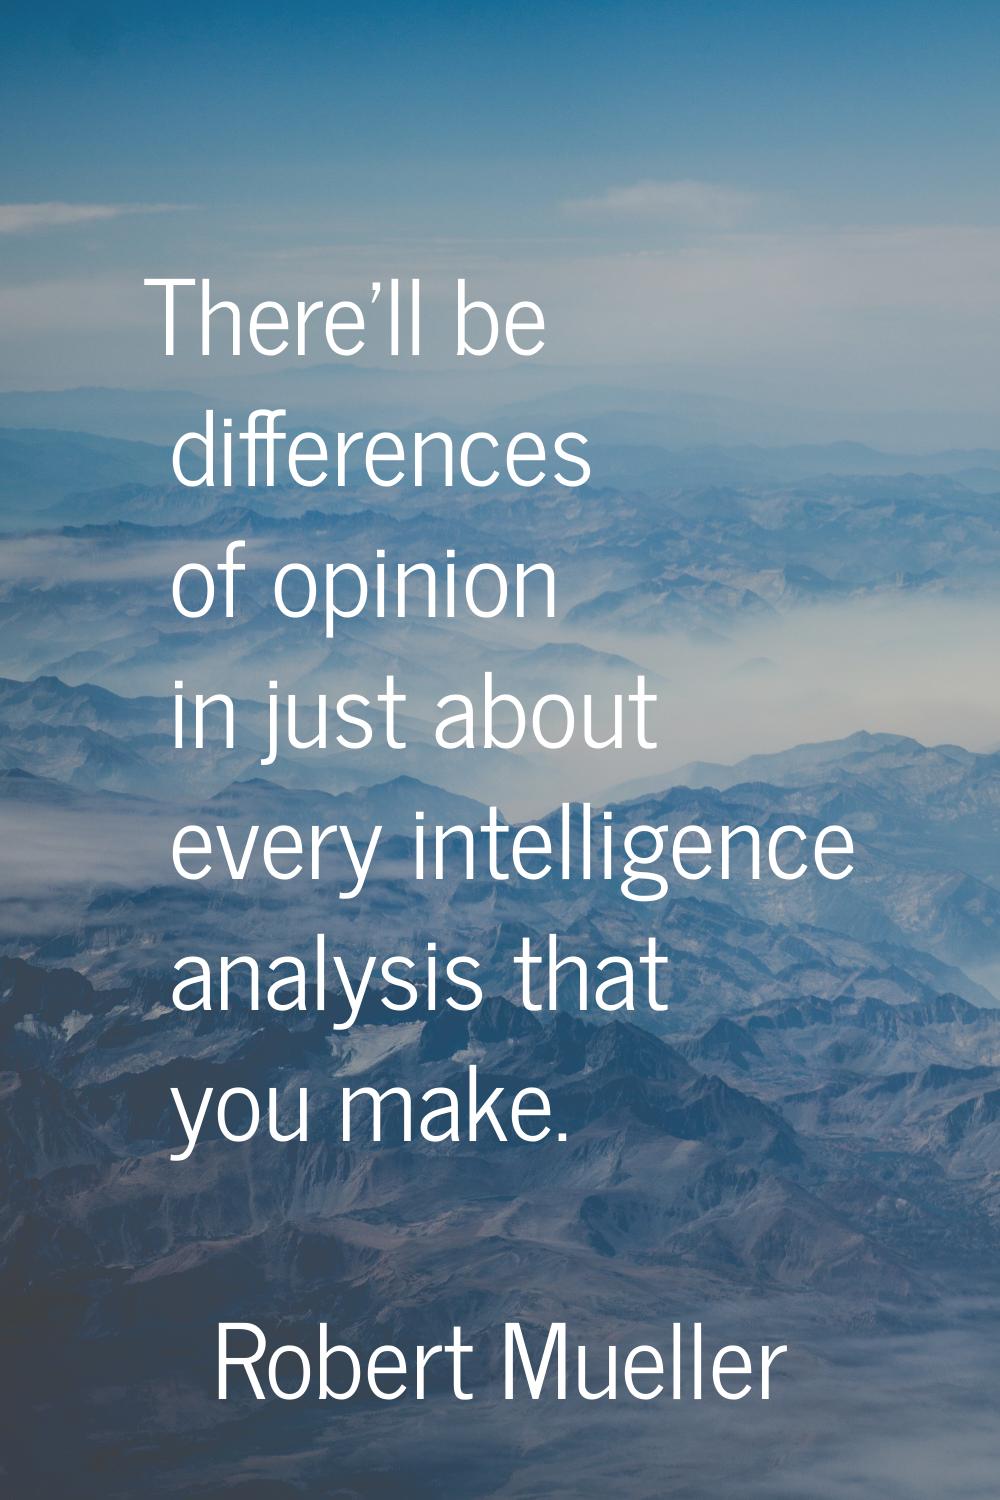 There'll be differences of opinion in just about every intelligence analysis that you make.